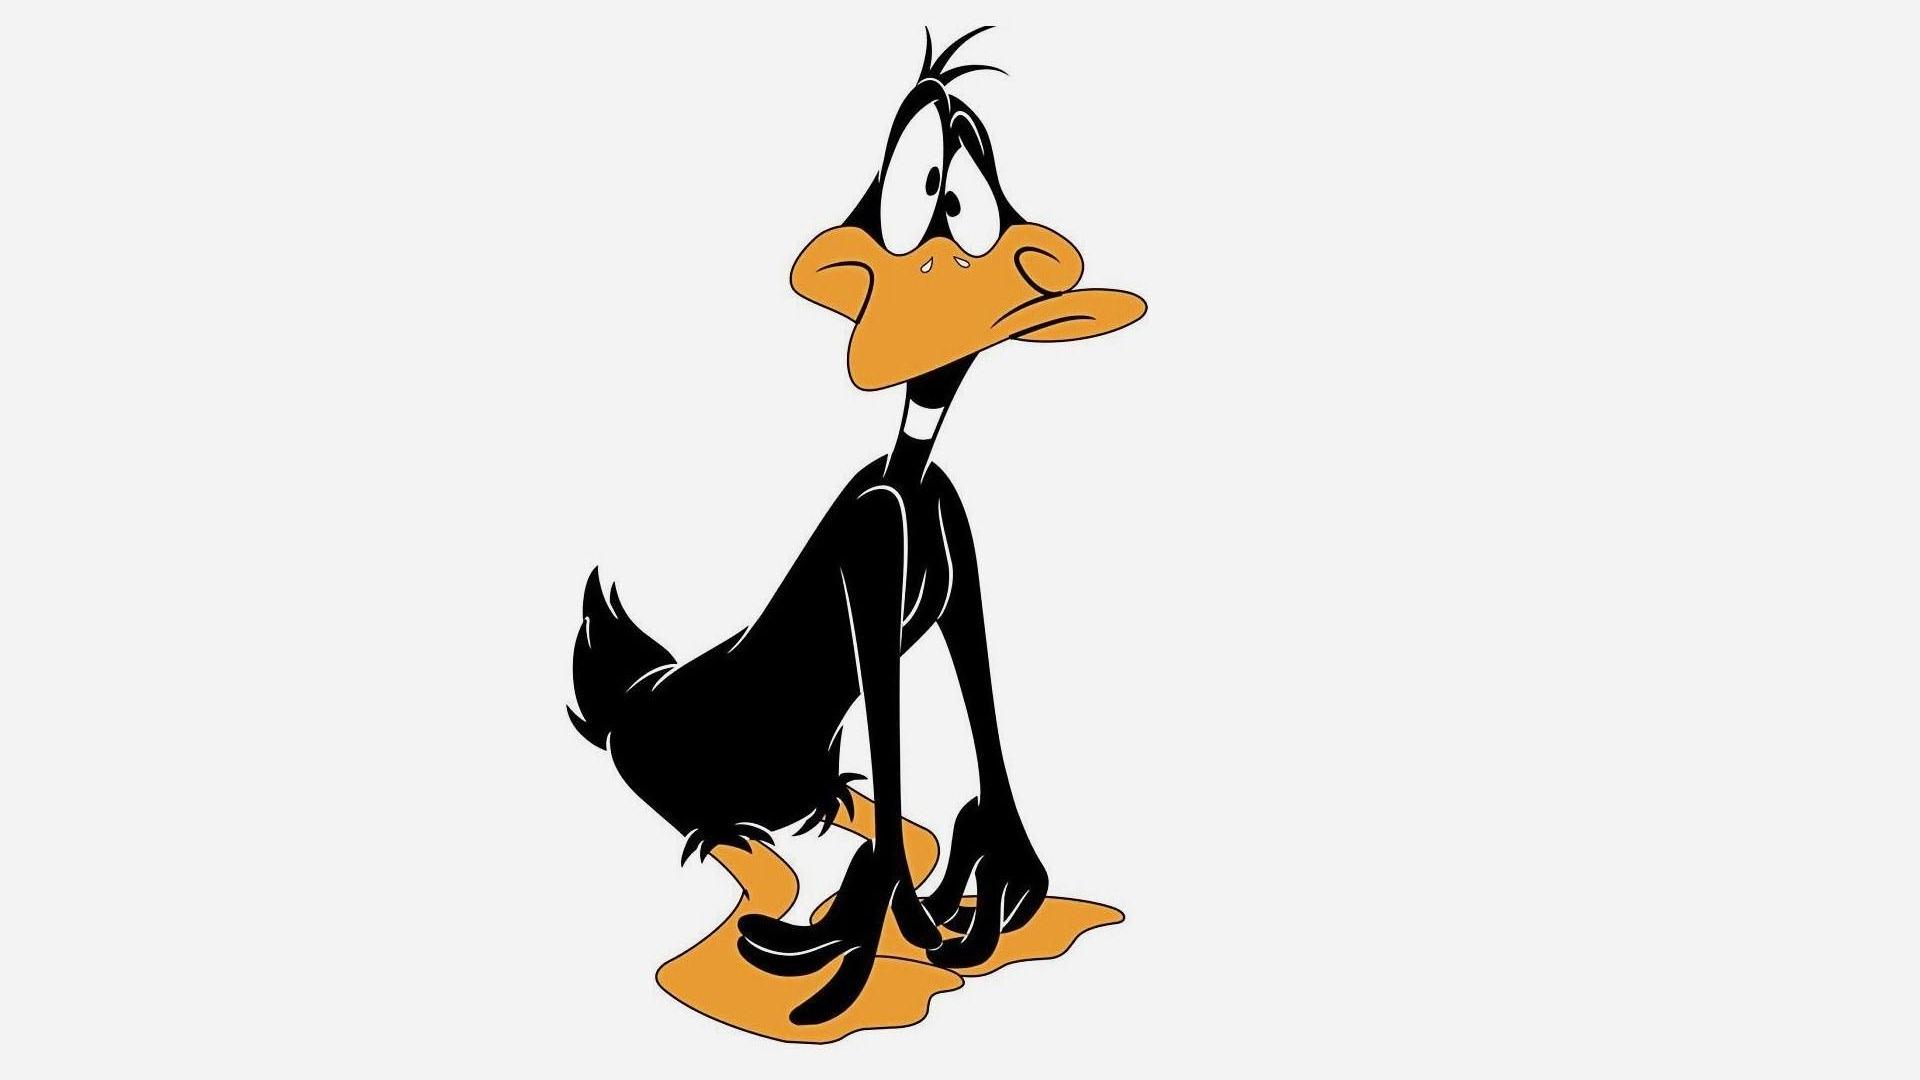 Daffy Duck wallpapers, Cartoon, HQ Daffy Duck pictures 4K Wallpapers 2019.